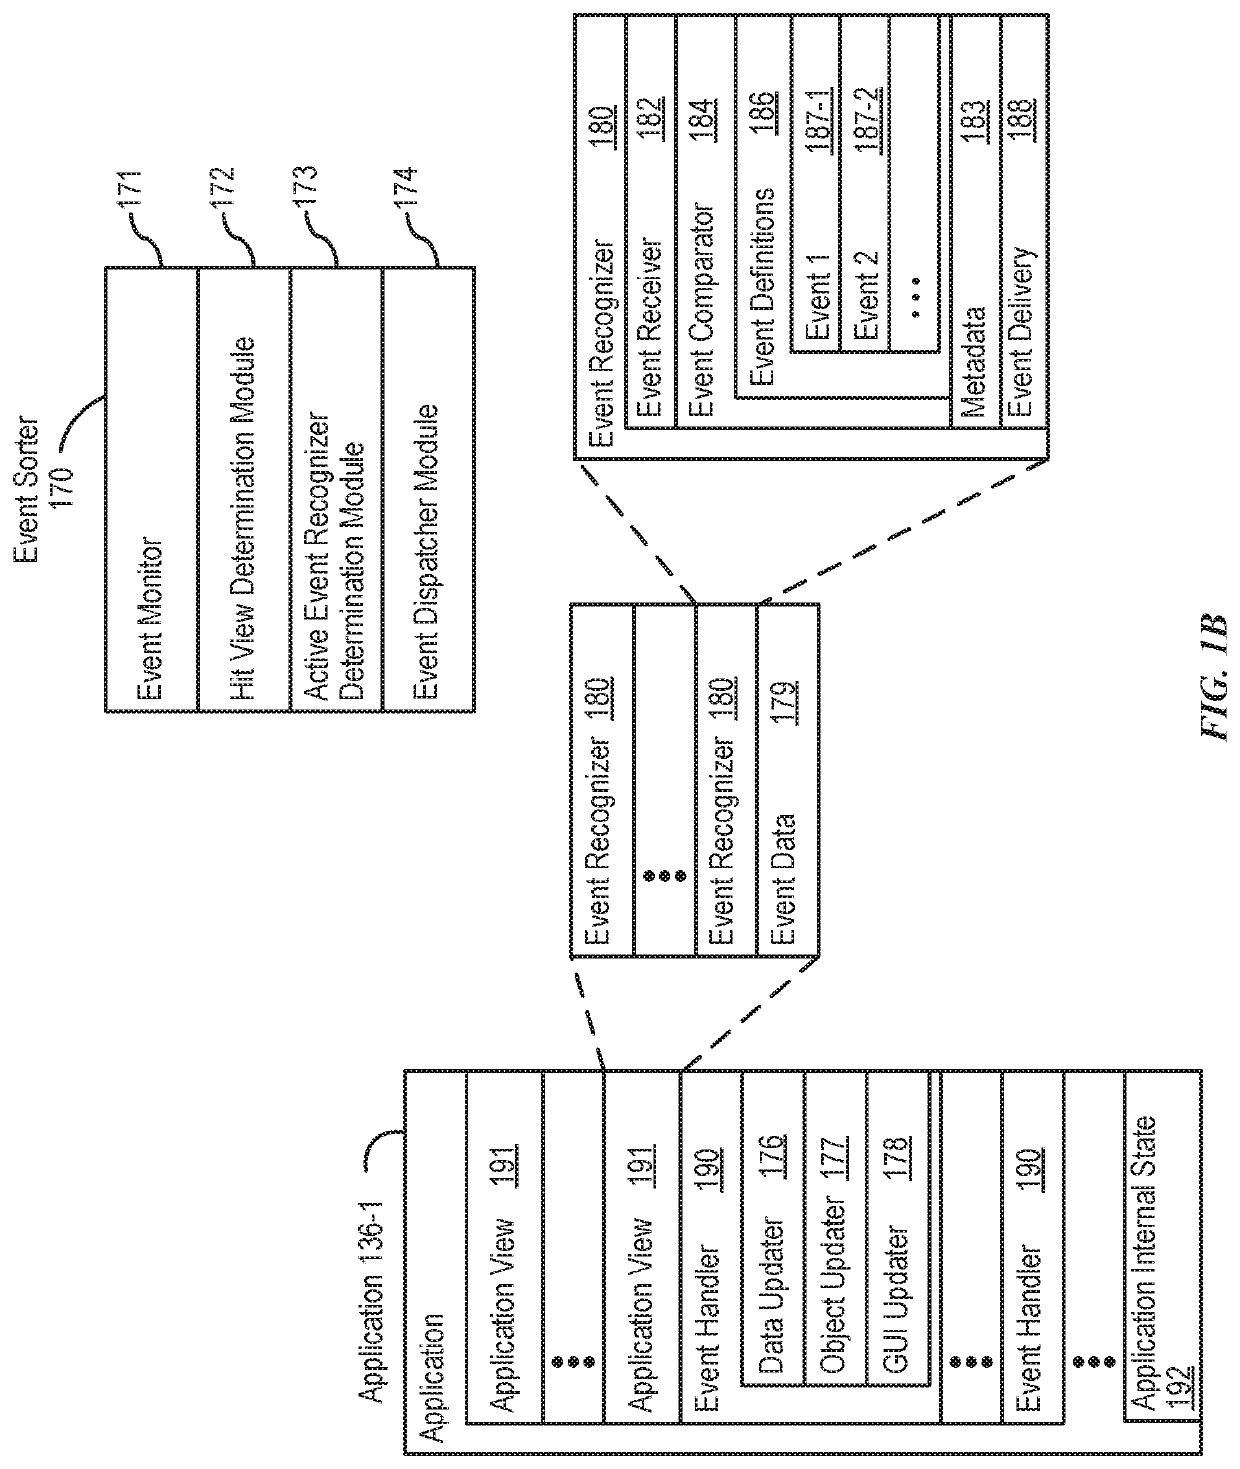 Methods and user interfaces for voice-based control of electronic devices